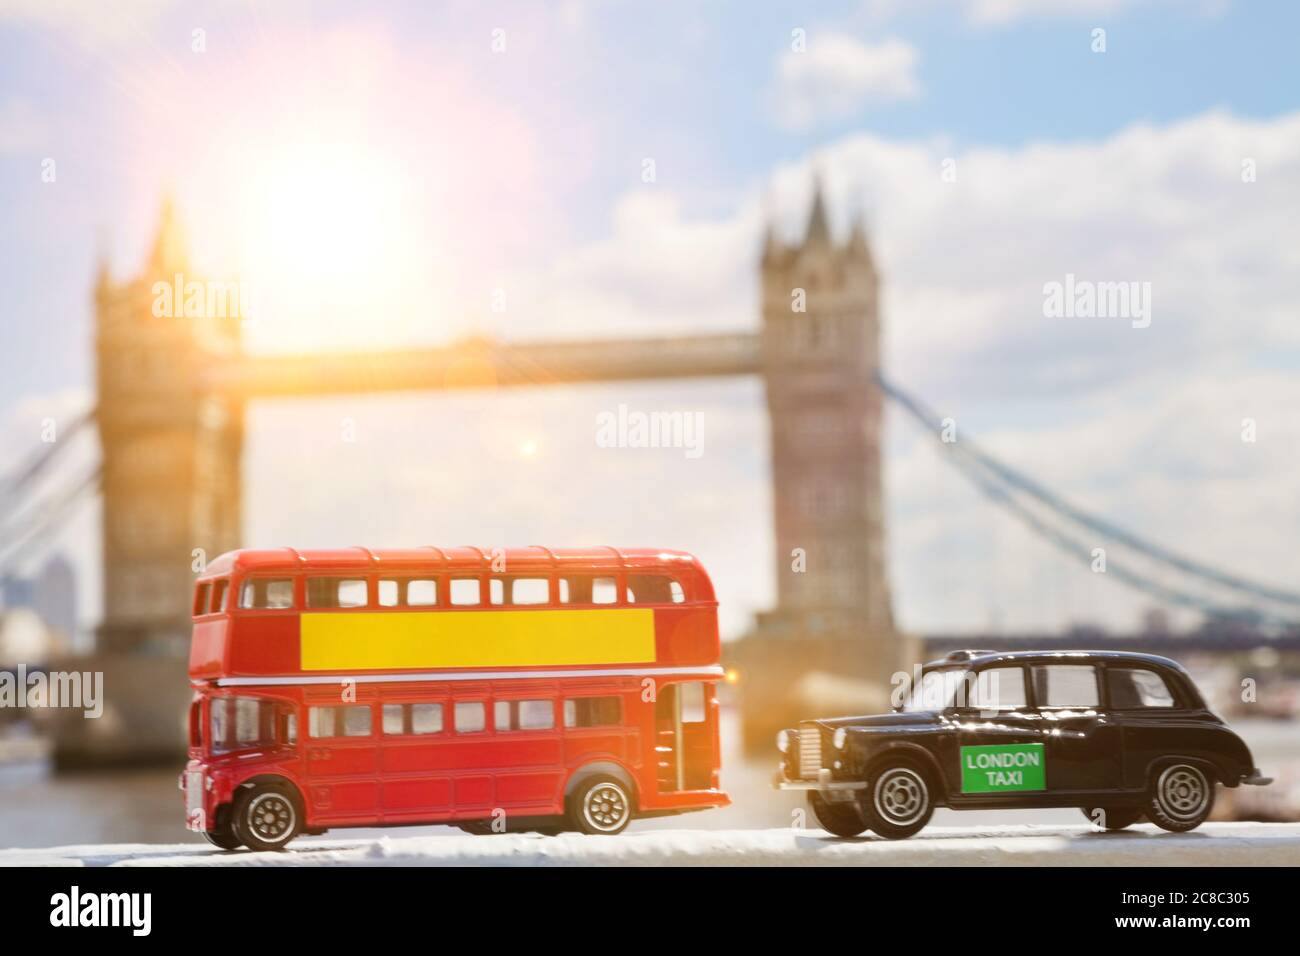 Close-up view of public transport figurines with Tower Bridge in the background Stock Photo